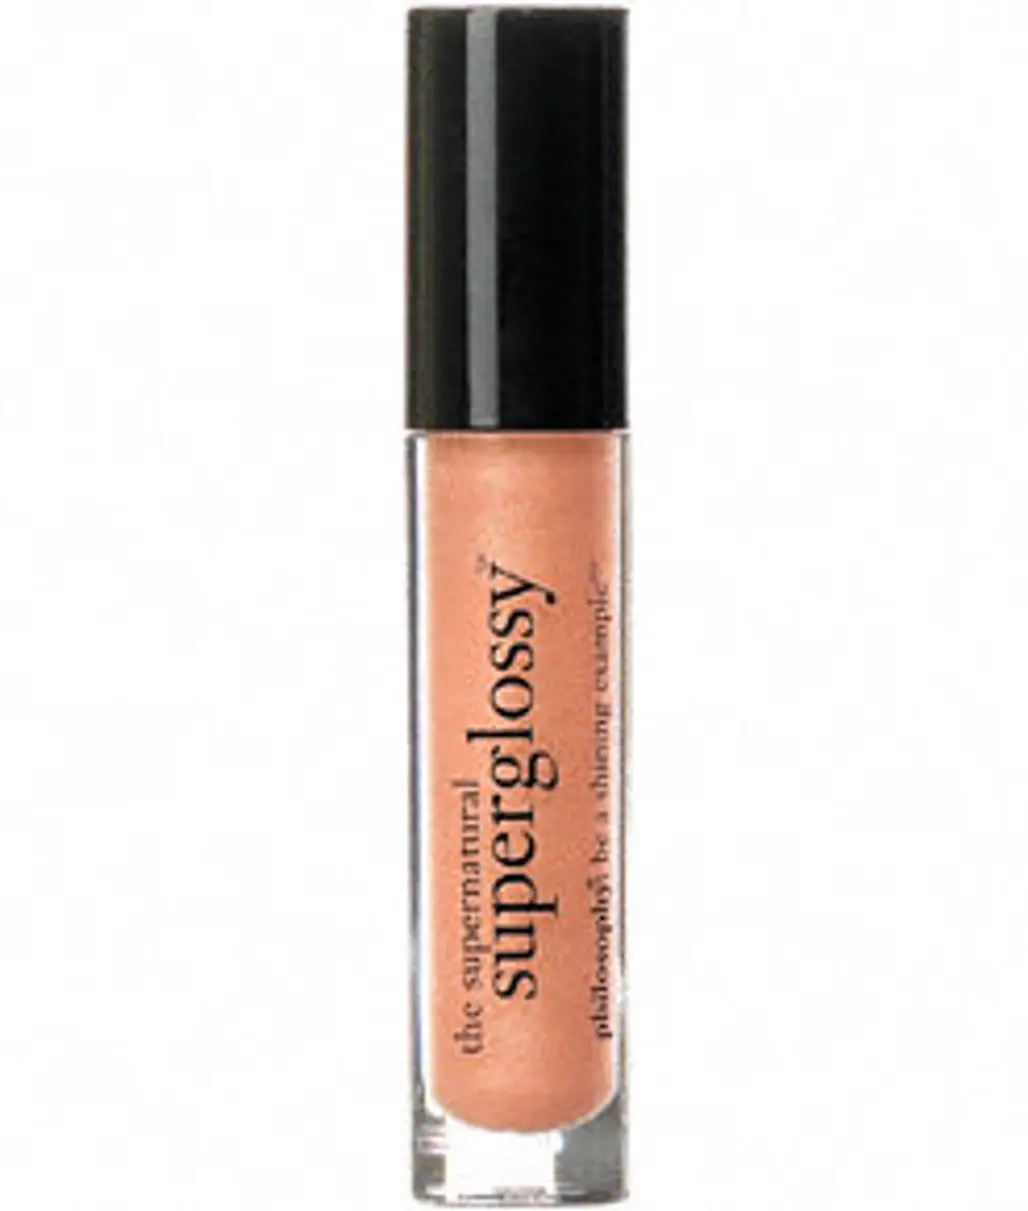 Philosophy the Supernatural Superglossy Lip Gloss SPF 15 “Reflect a Little” and “Open Your Heart”